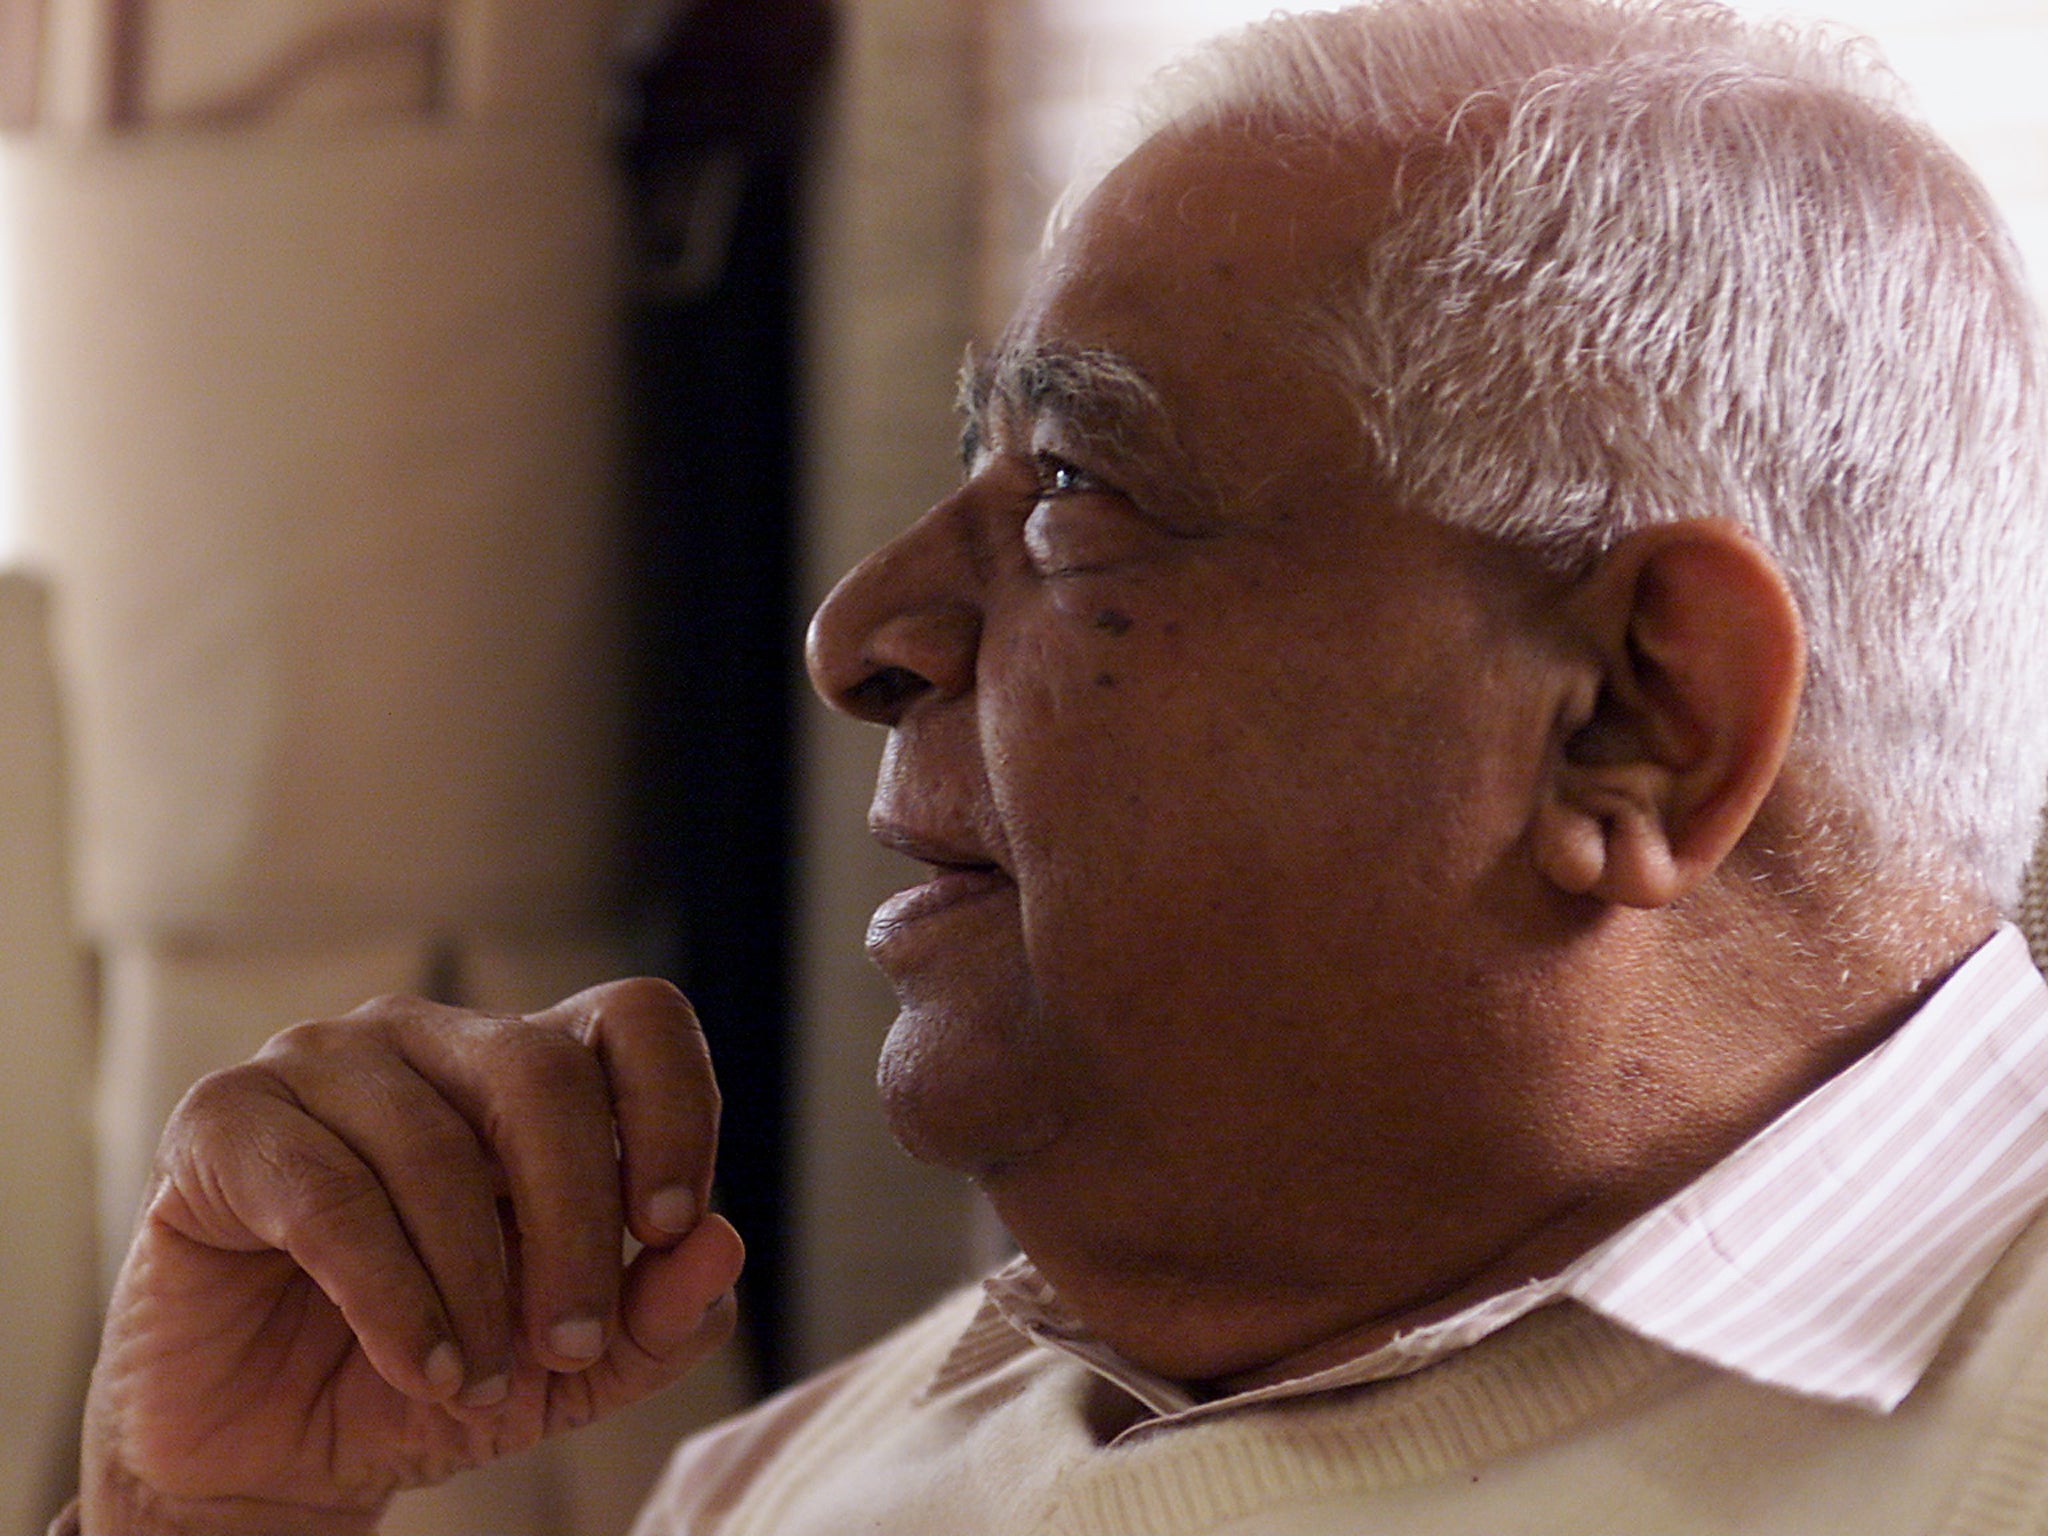 Through recordings, Goenka’s is one of the only voices meditators will hear for 10 days